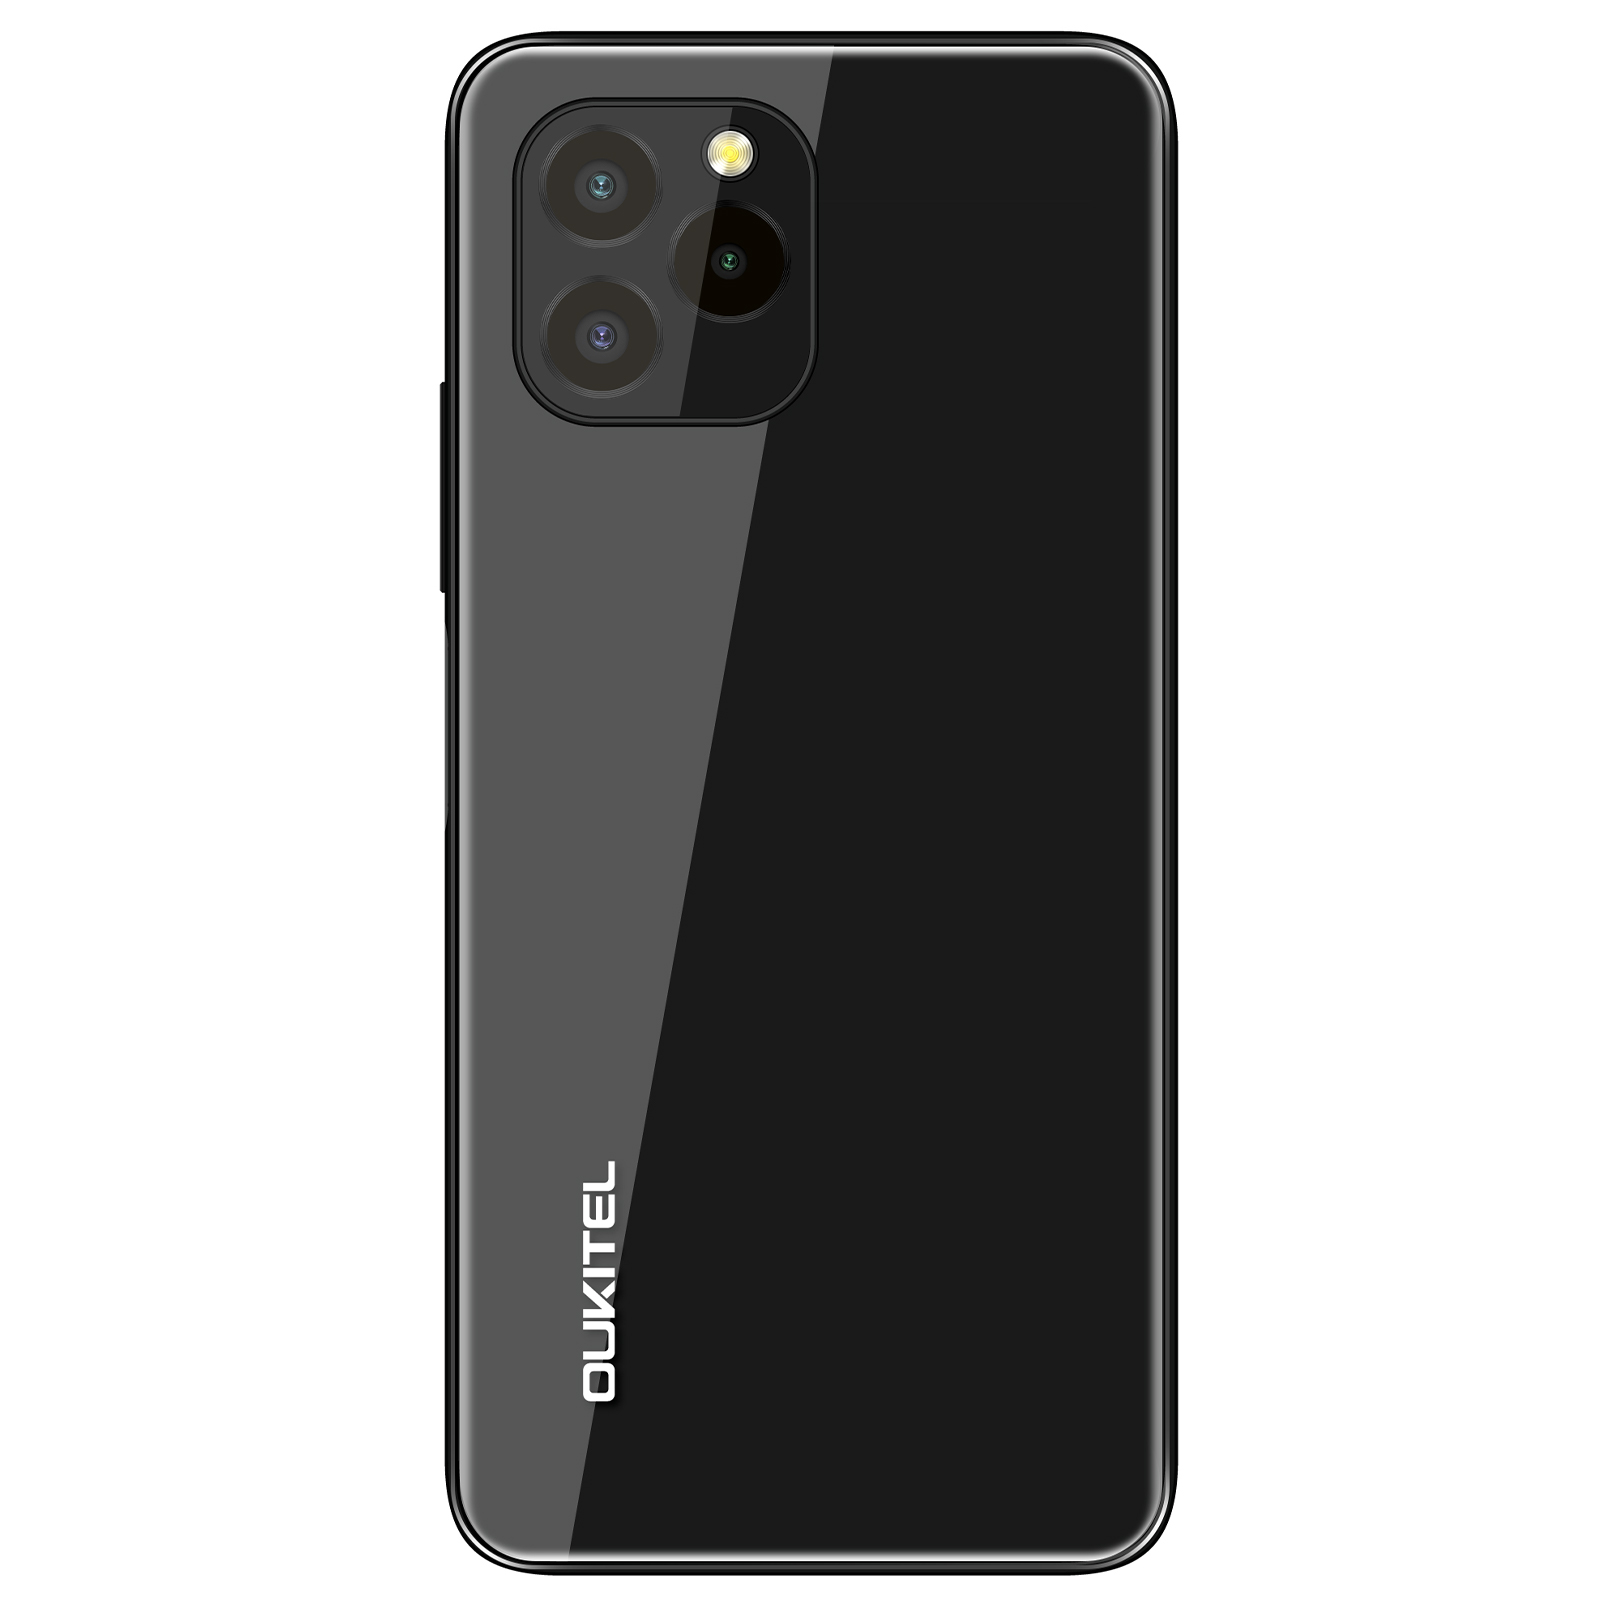 Find OUKITEL C21 Pro Global Version 4GB 64GB 6.39 inch Android 11 4000mAh 21MP Main Camera Helio P22 Octa Core 4G Smartphone for Sale on Gipsybee.com with cryptocurrencies